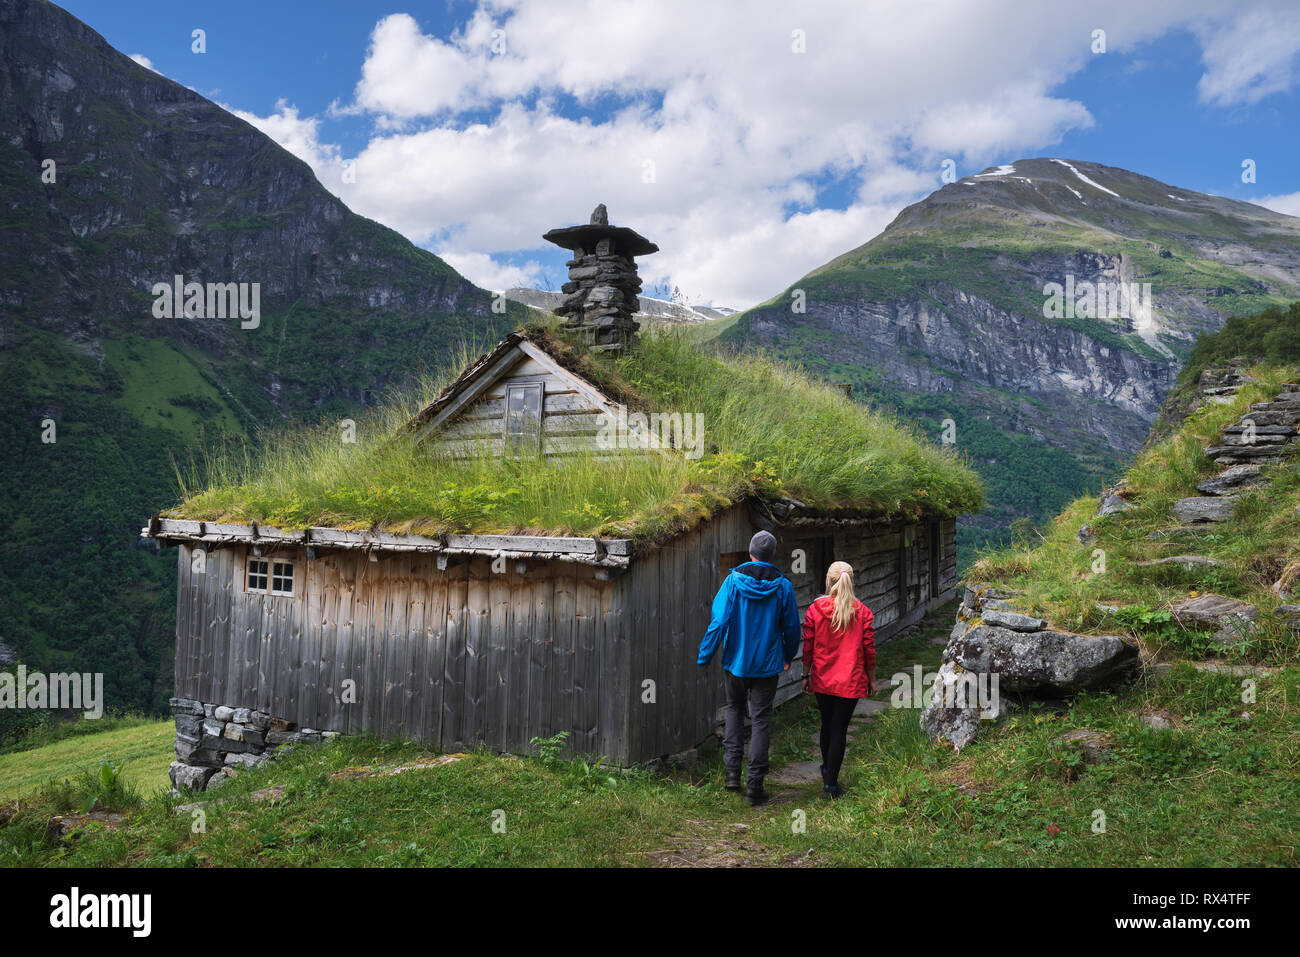 Kagefla - historic mountain farms on the mountainsides along the Geirangerfjorden fjord. Tourist attraction of Norway. A pair of travelers visiting tr Stock Photo